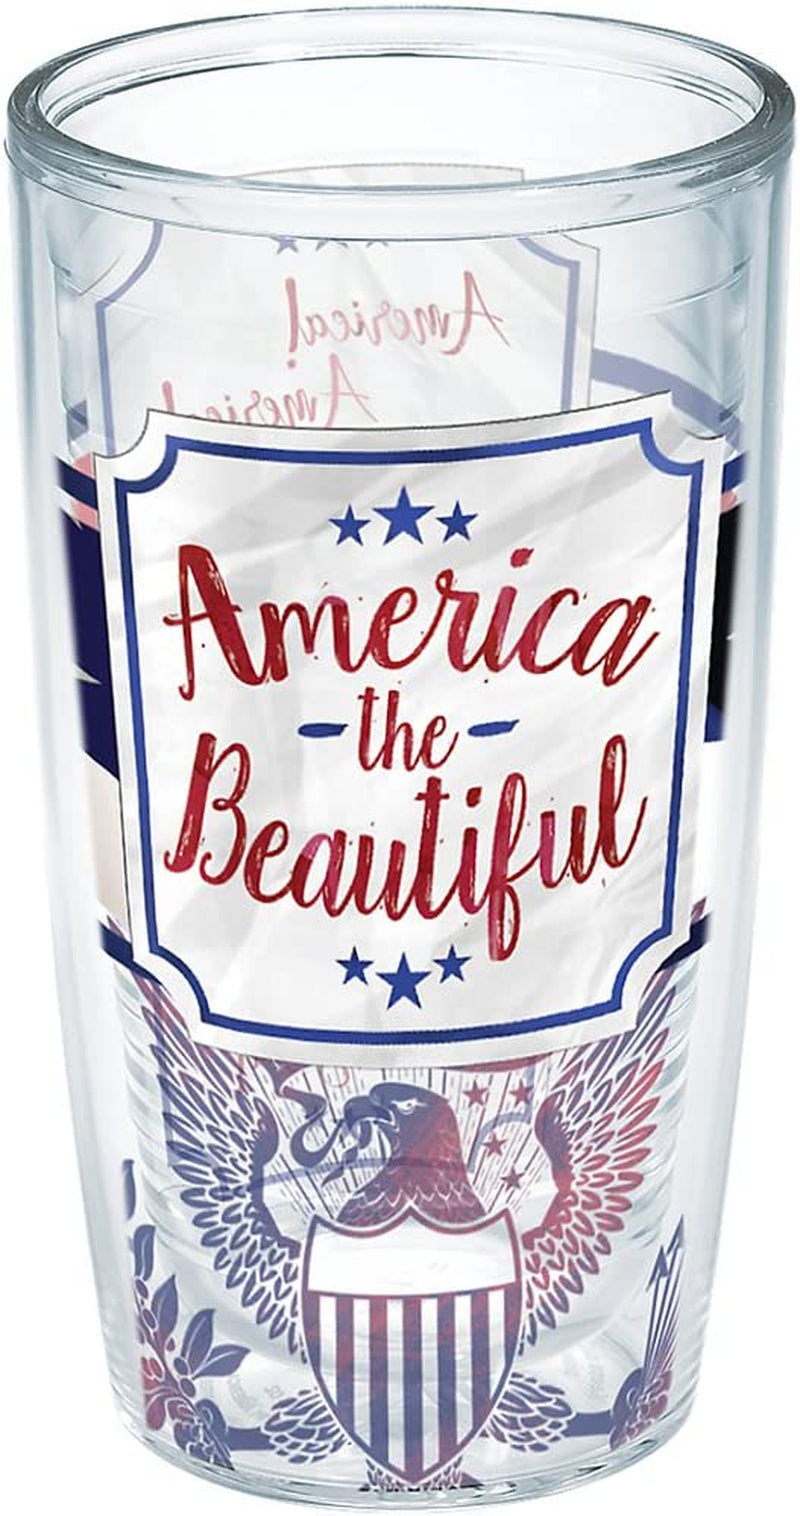 Tervis America the Beautiful Insulated Tumbler with Wrap, 16 Oz Mug - Tritan, Clear Home & Garden > Kitchen & Dining > Tableware > Drinkware Tervis Unlidded 16oz 